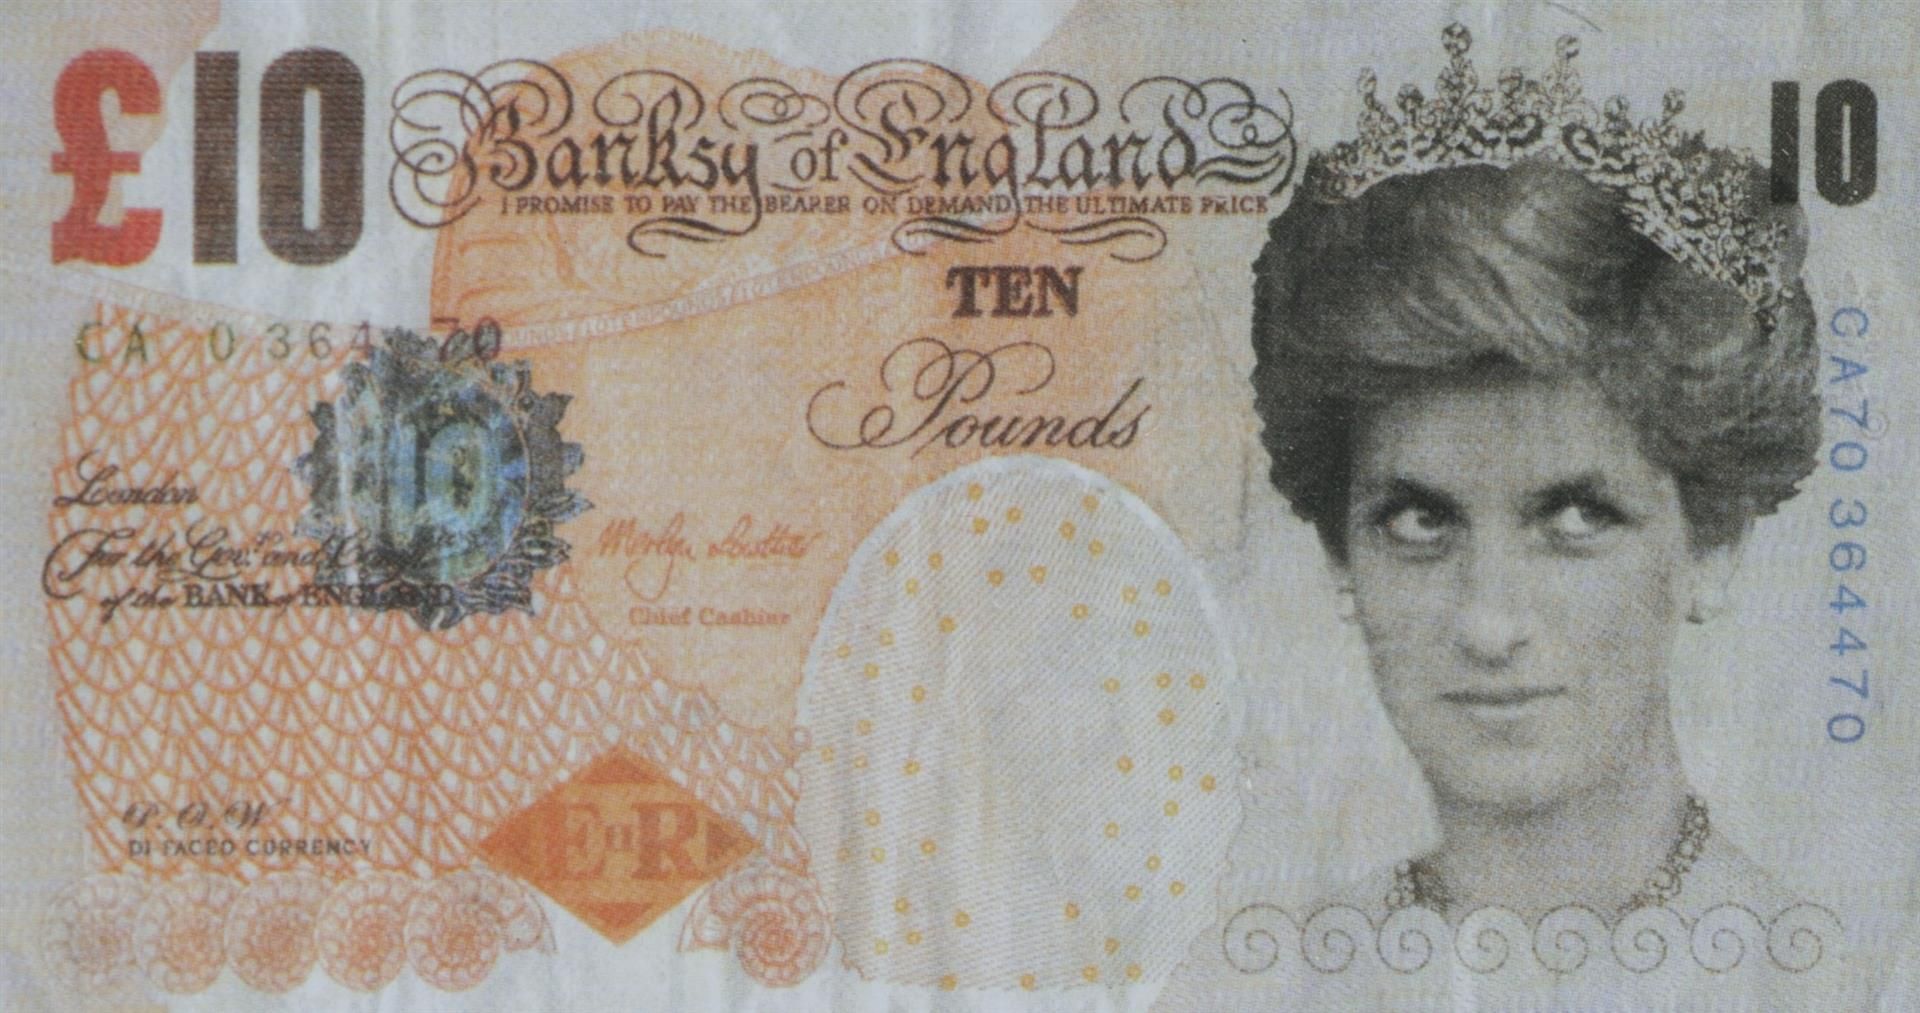 Banksy (1947-)
Di-faced ten-pound note. Published by Santa'